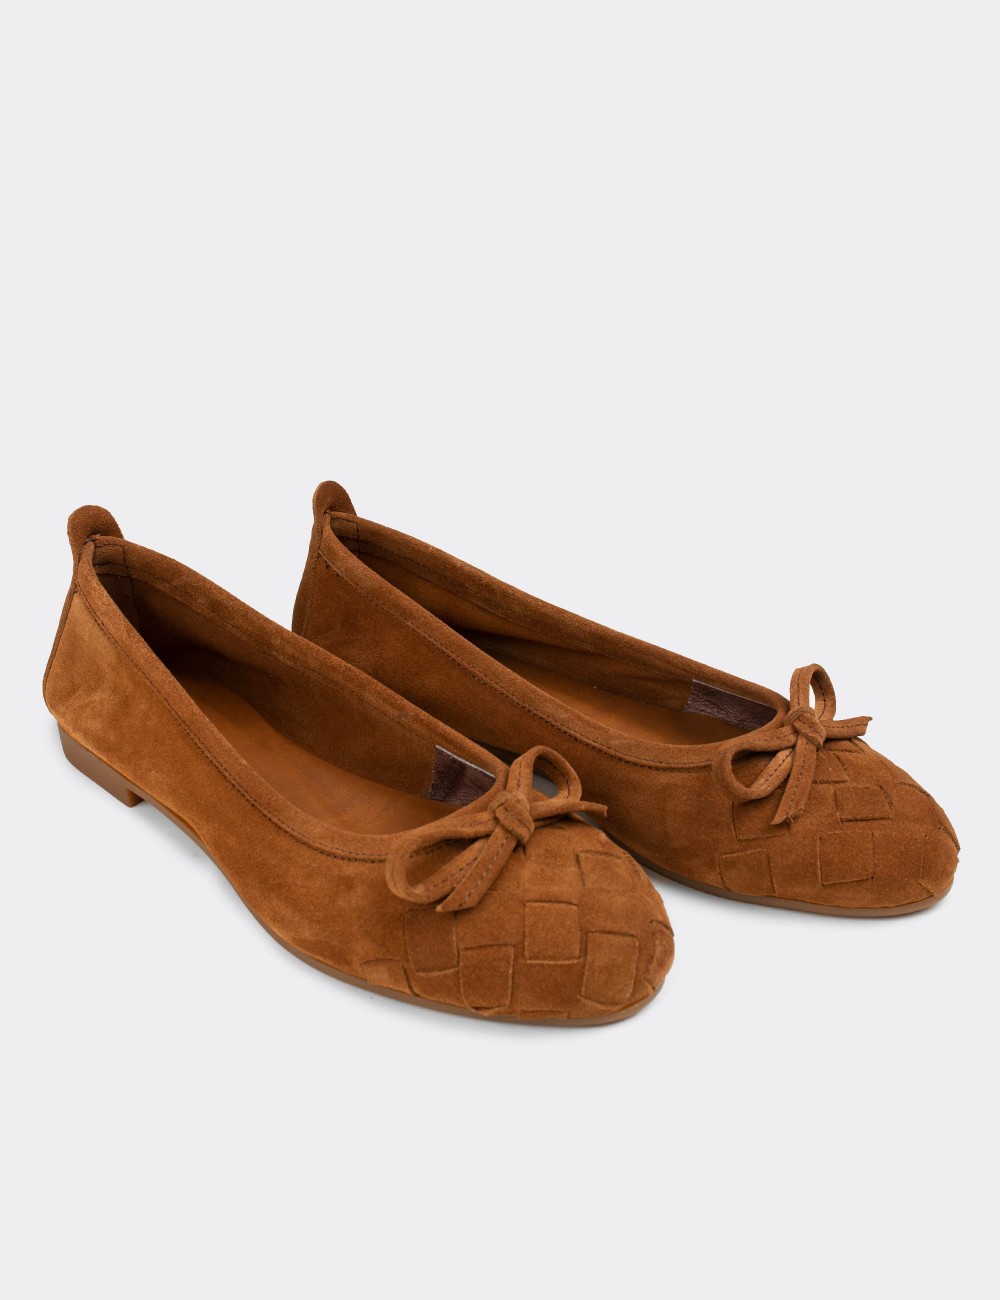 Tan Suede Leather Loafers - E3205ZTBAC03